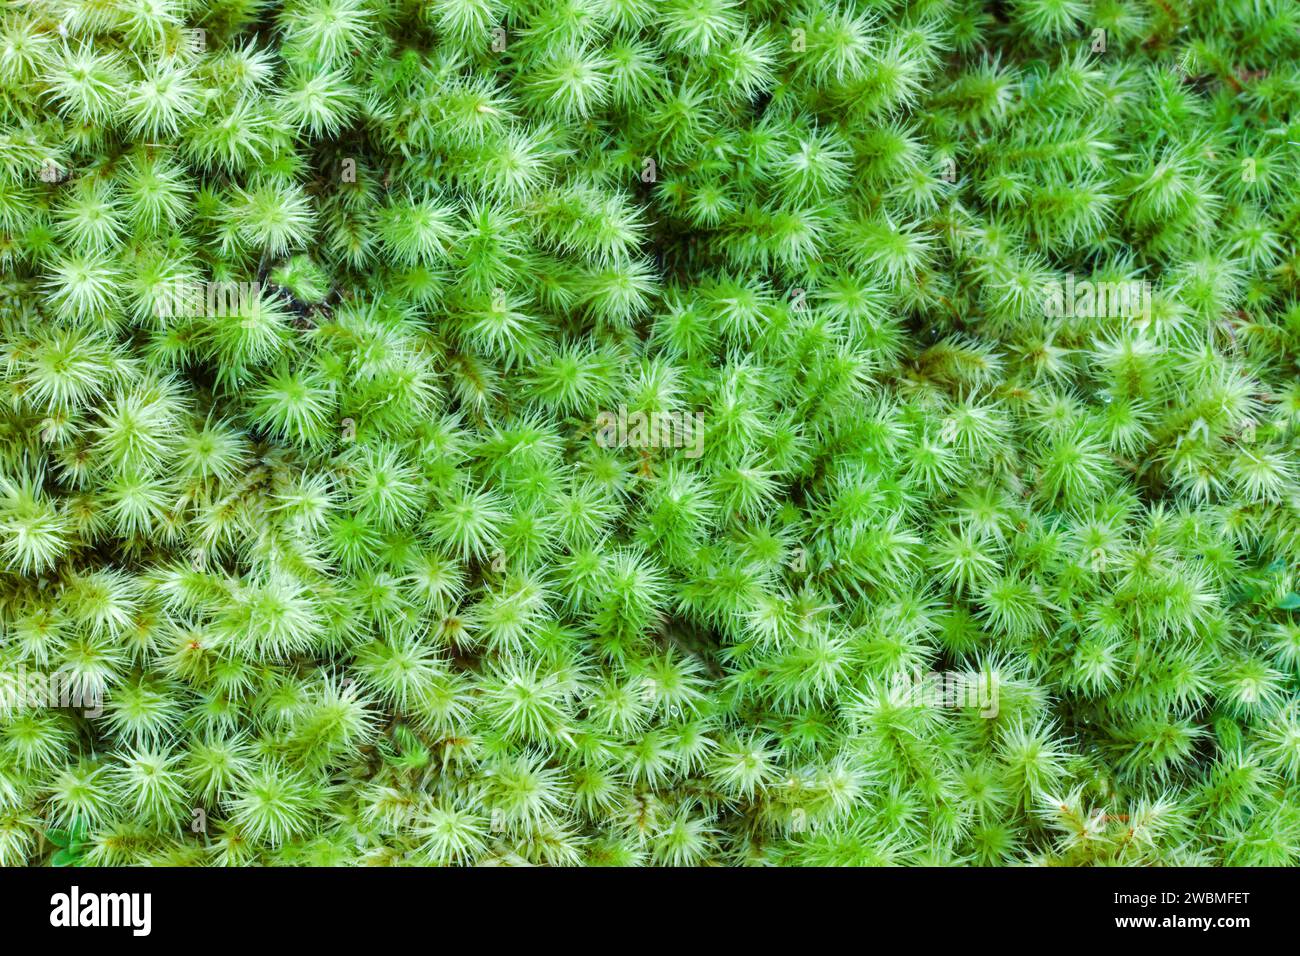 Philonotis fontana (Fountain Apple-moss) is typically of marshes and flushes especially in mountains. It is widespread in the northern hemisphere. Stock Photo